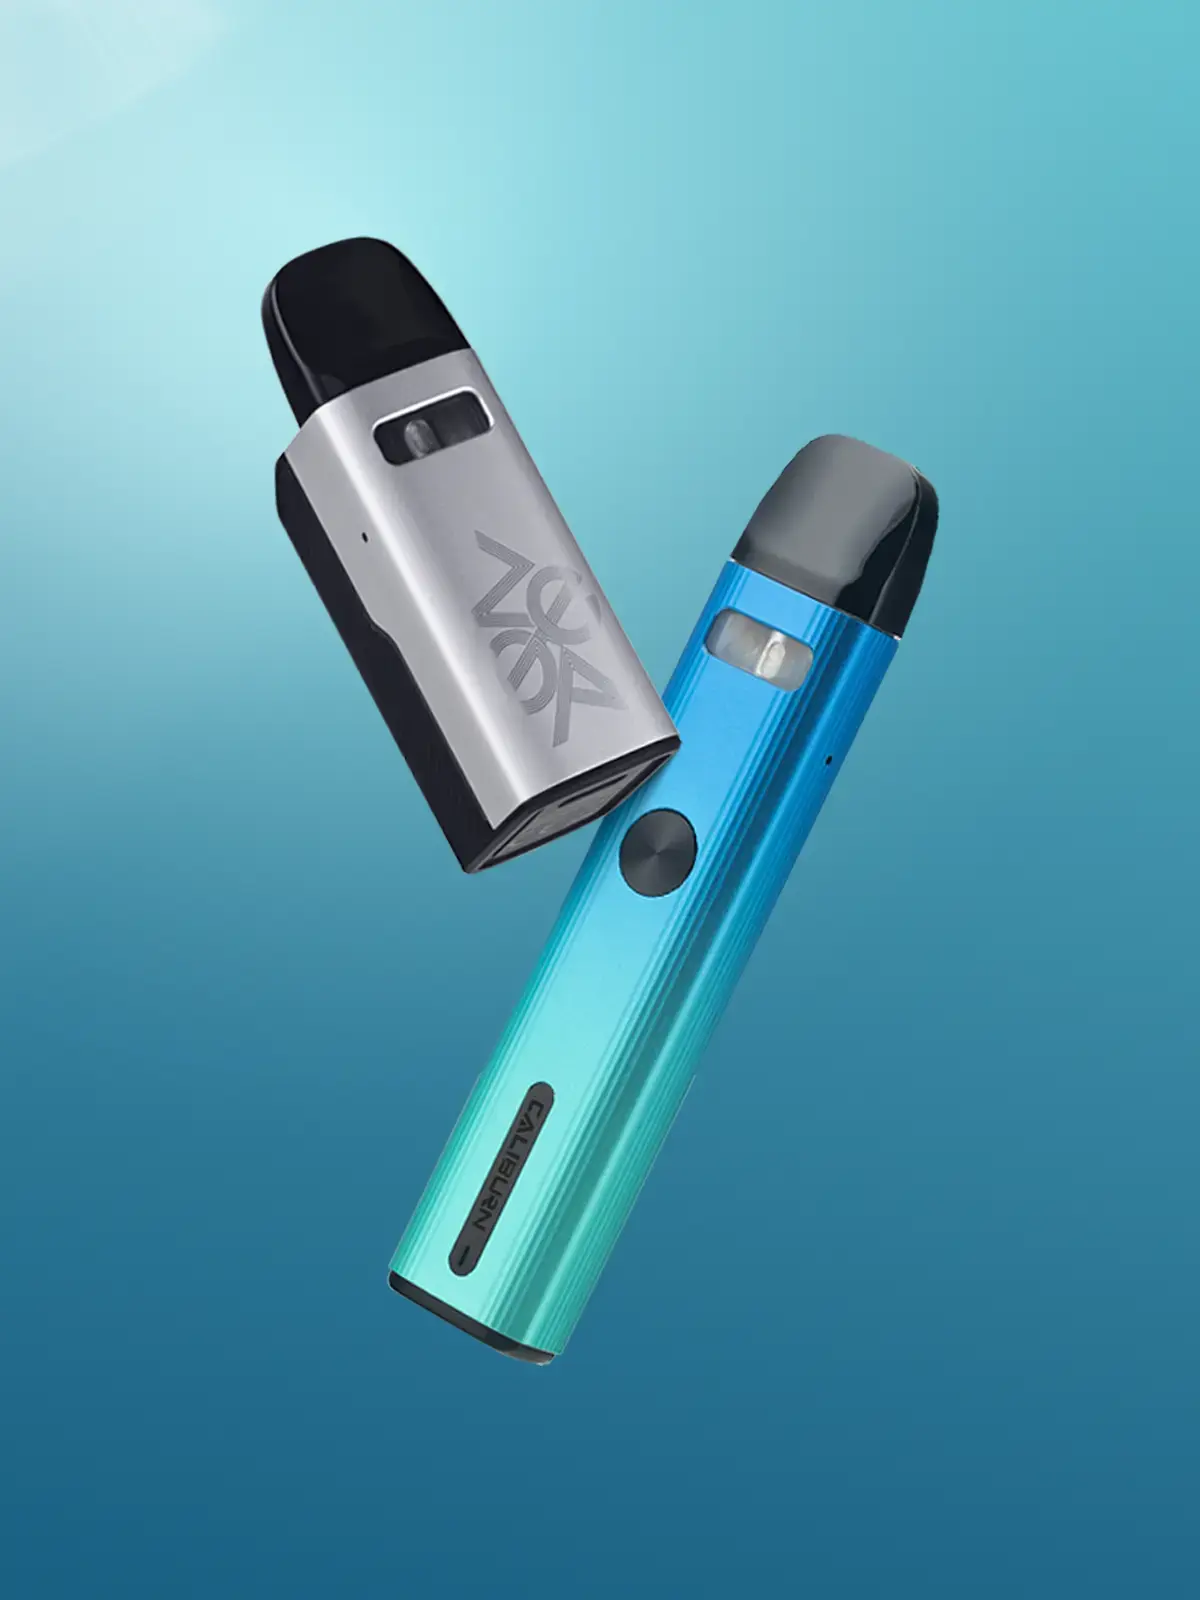 A UWELL Caliburn GZ2 and UWELL Caliburn G2 floating in front of a blue background